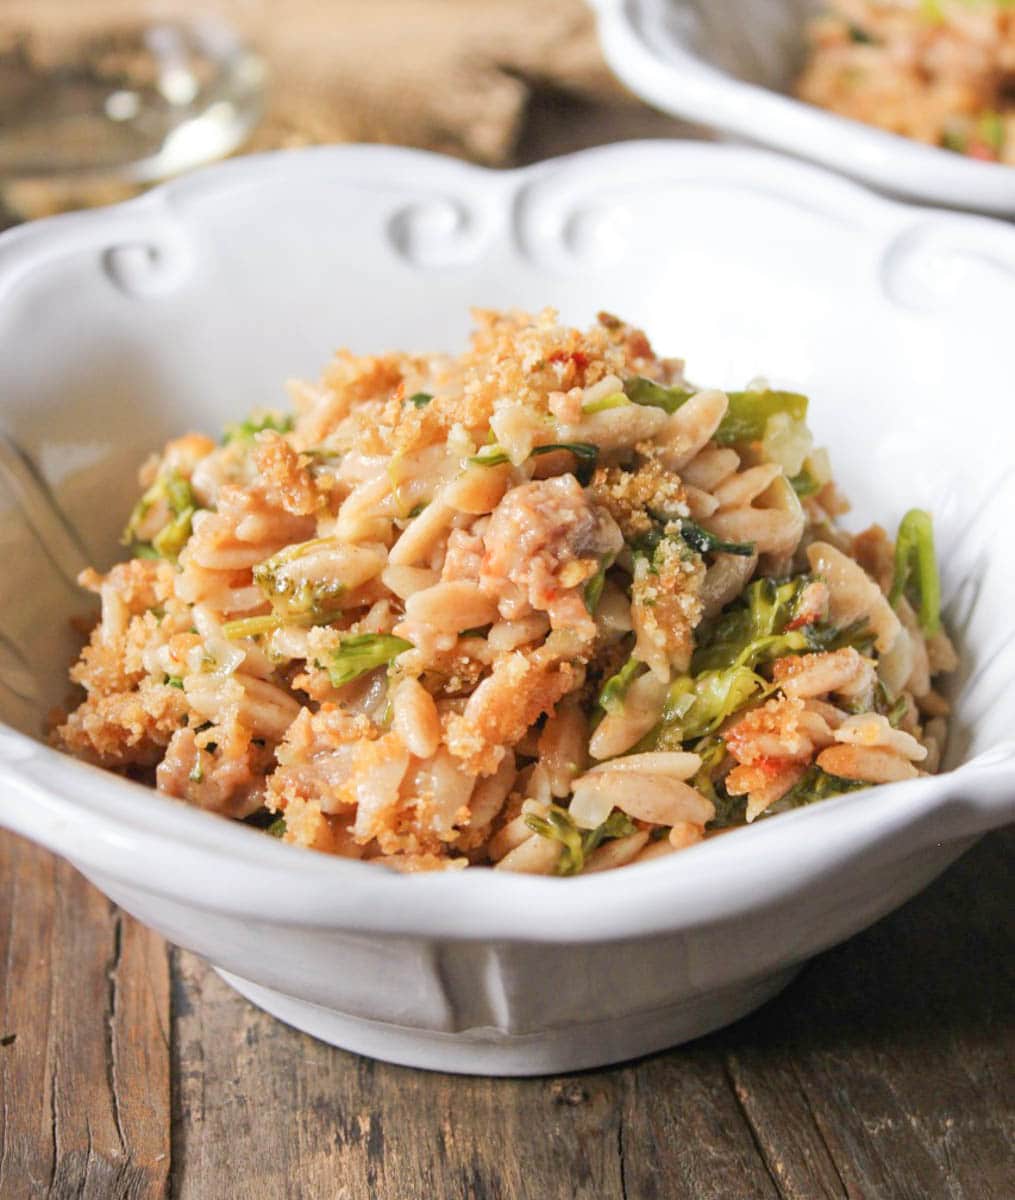 baked-orzo-casserole-with-turkey-sausage-broccolini-fontina-4